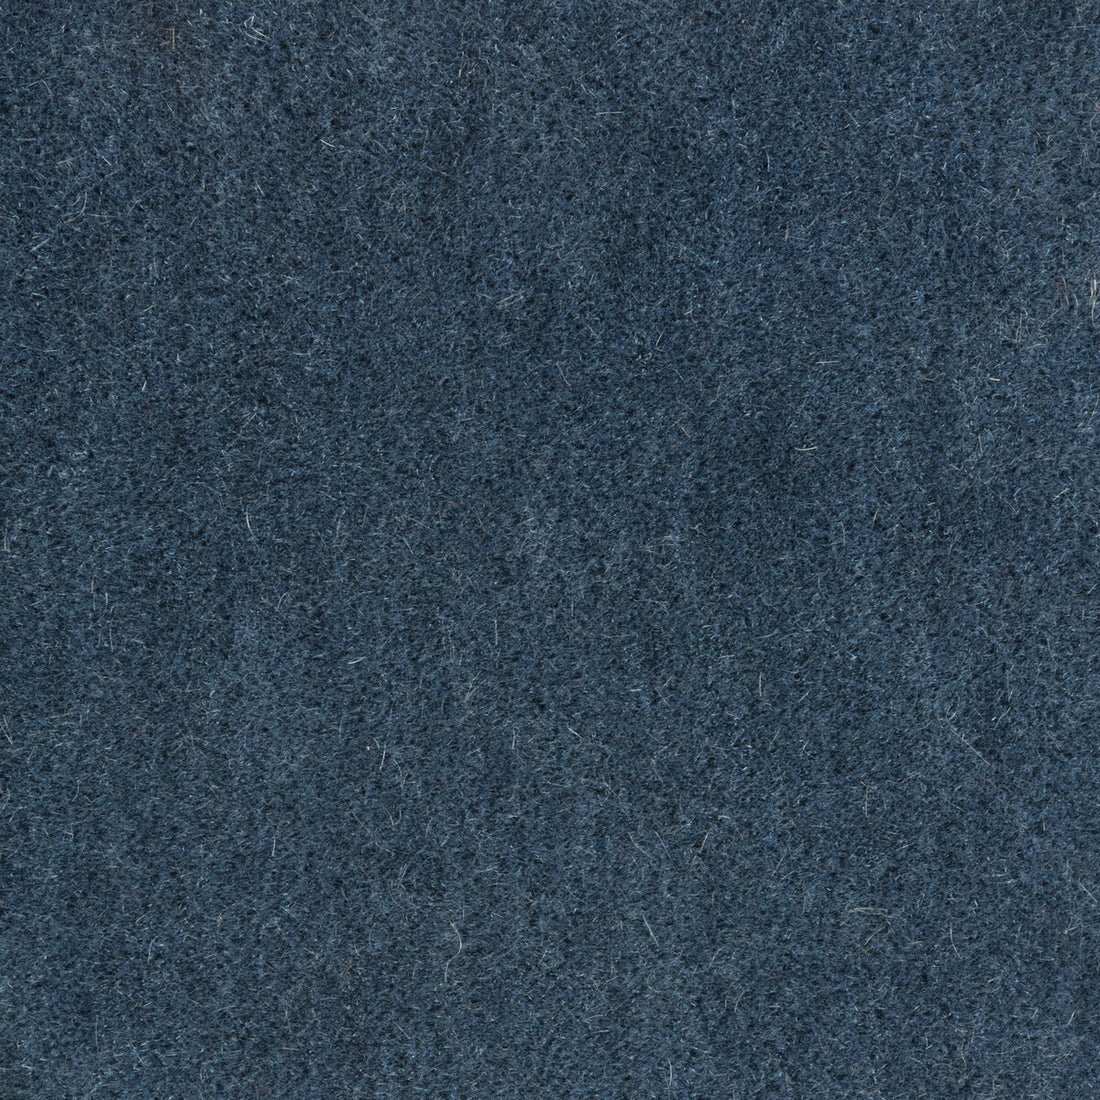 Bachelor Mohair fabric in blue color - pattern 8014101.55.0 - by Brunschwig &amp; Fils